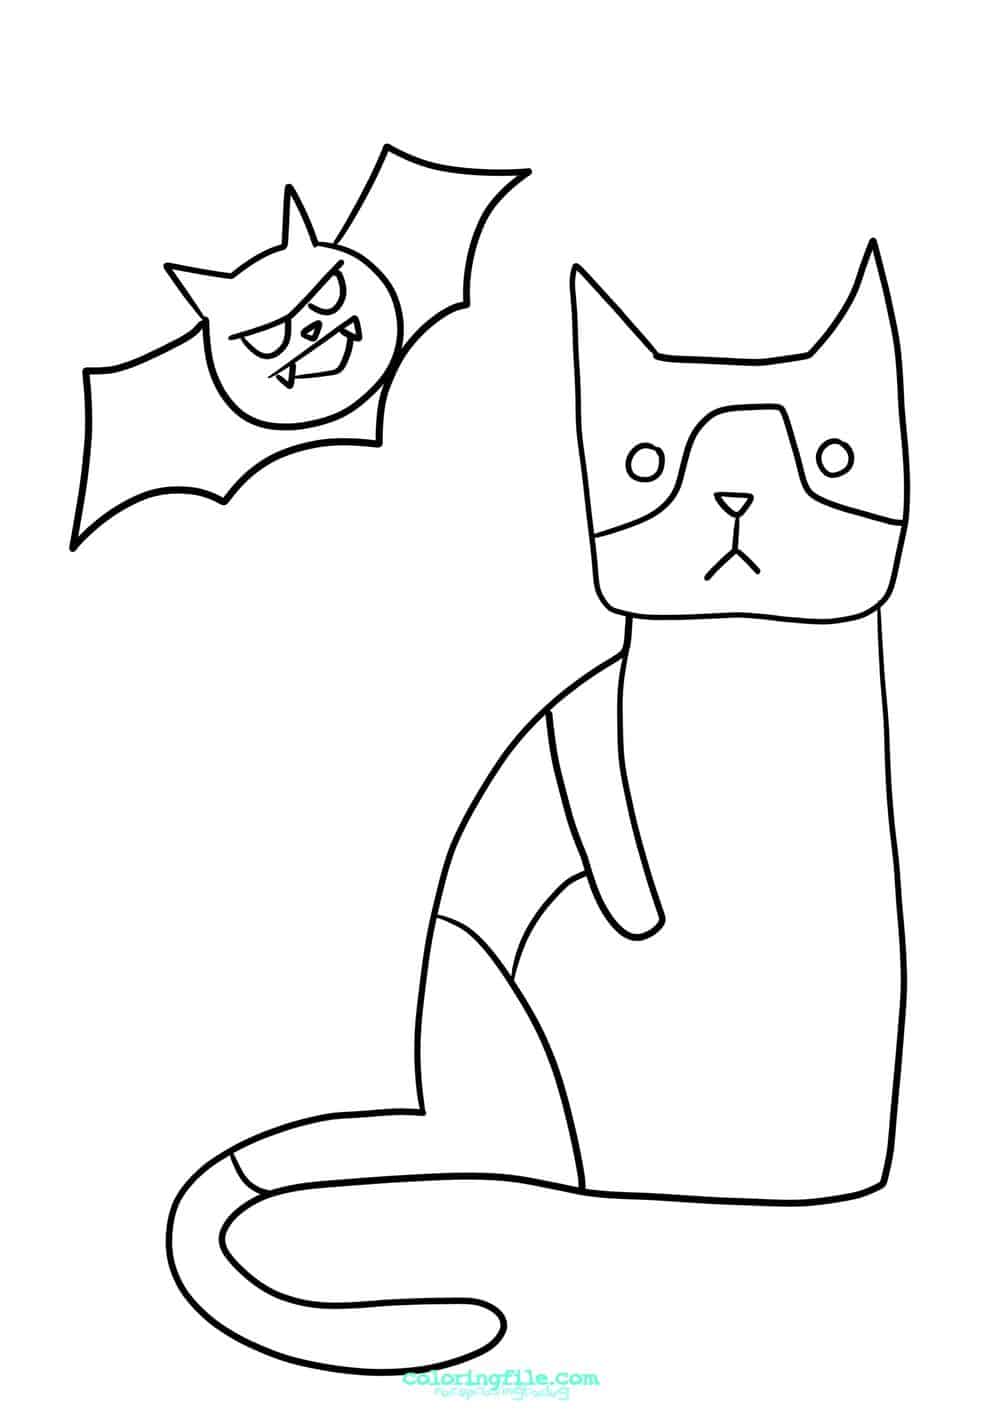 Halloween cat and bat coloring pages